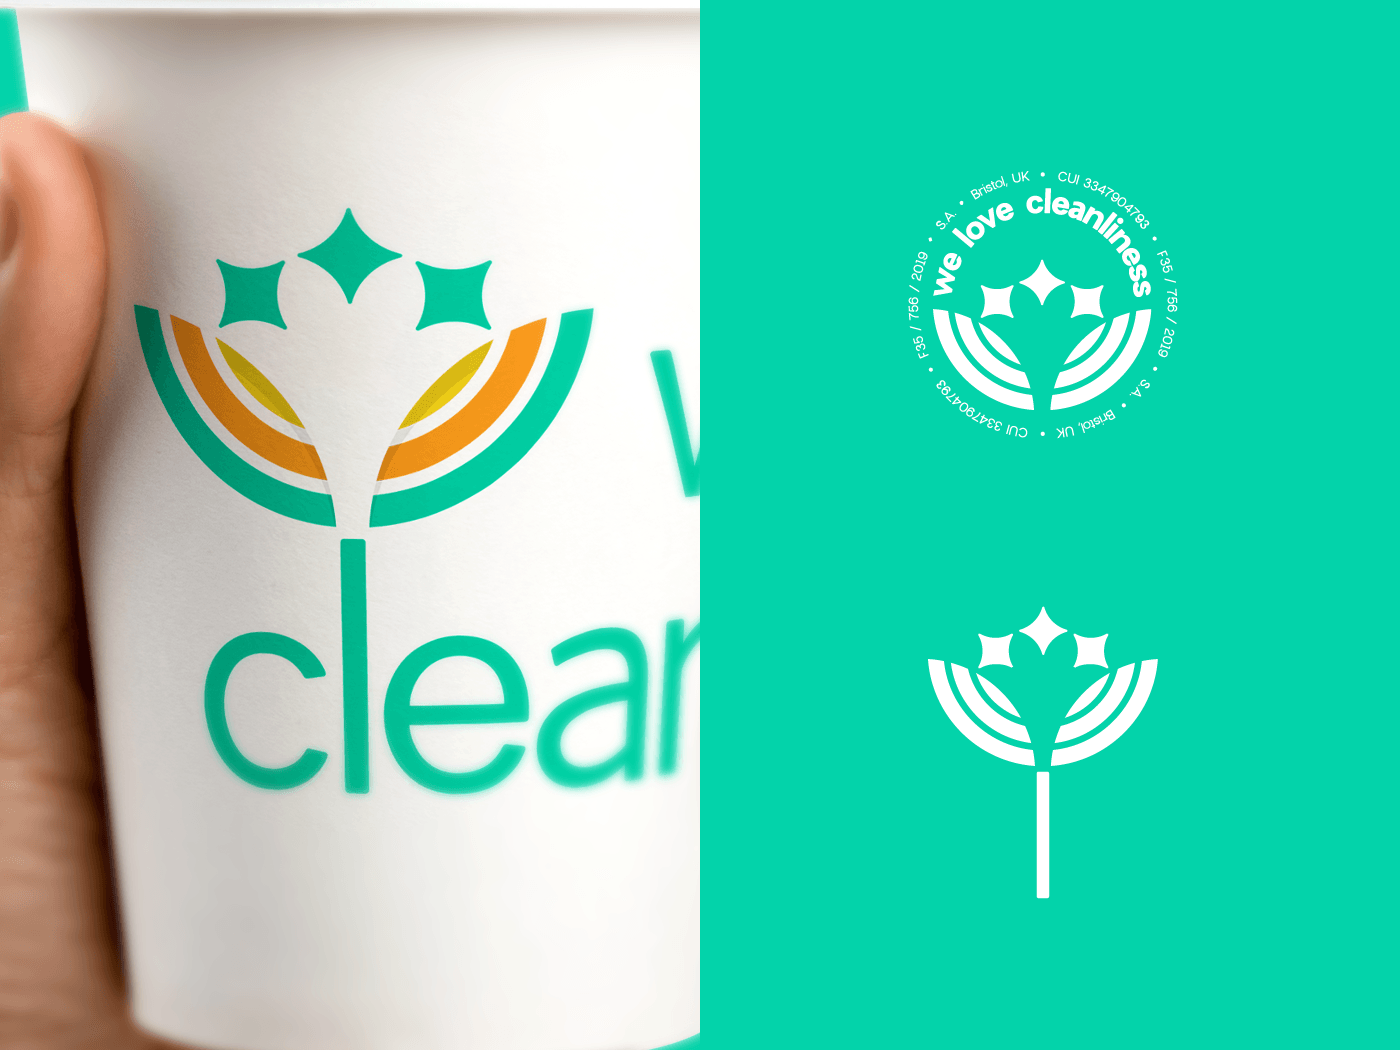 Cleanliness Logo - We Love Cleanliness - logo and stamp design by Remus Hincu ...